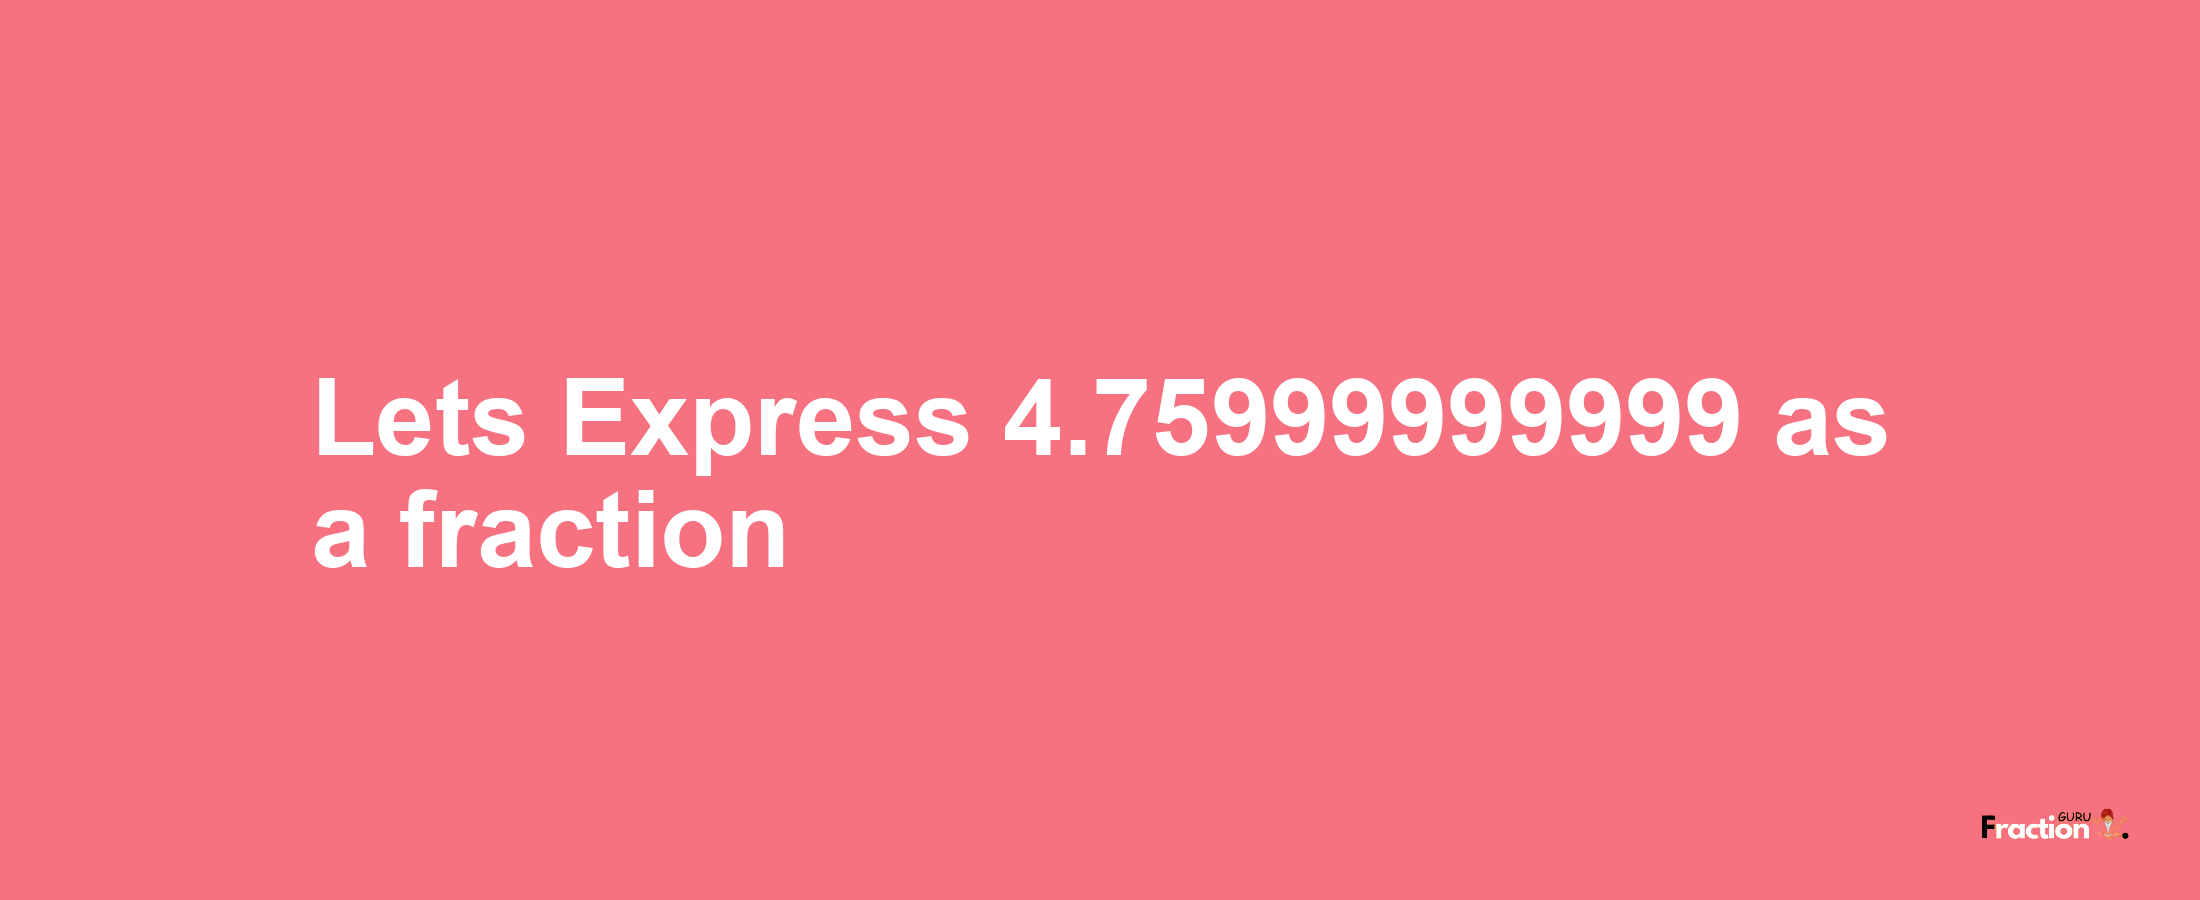 Lets Express 4.75999999999 as afraction